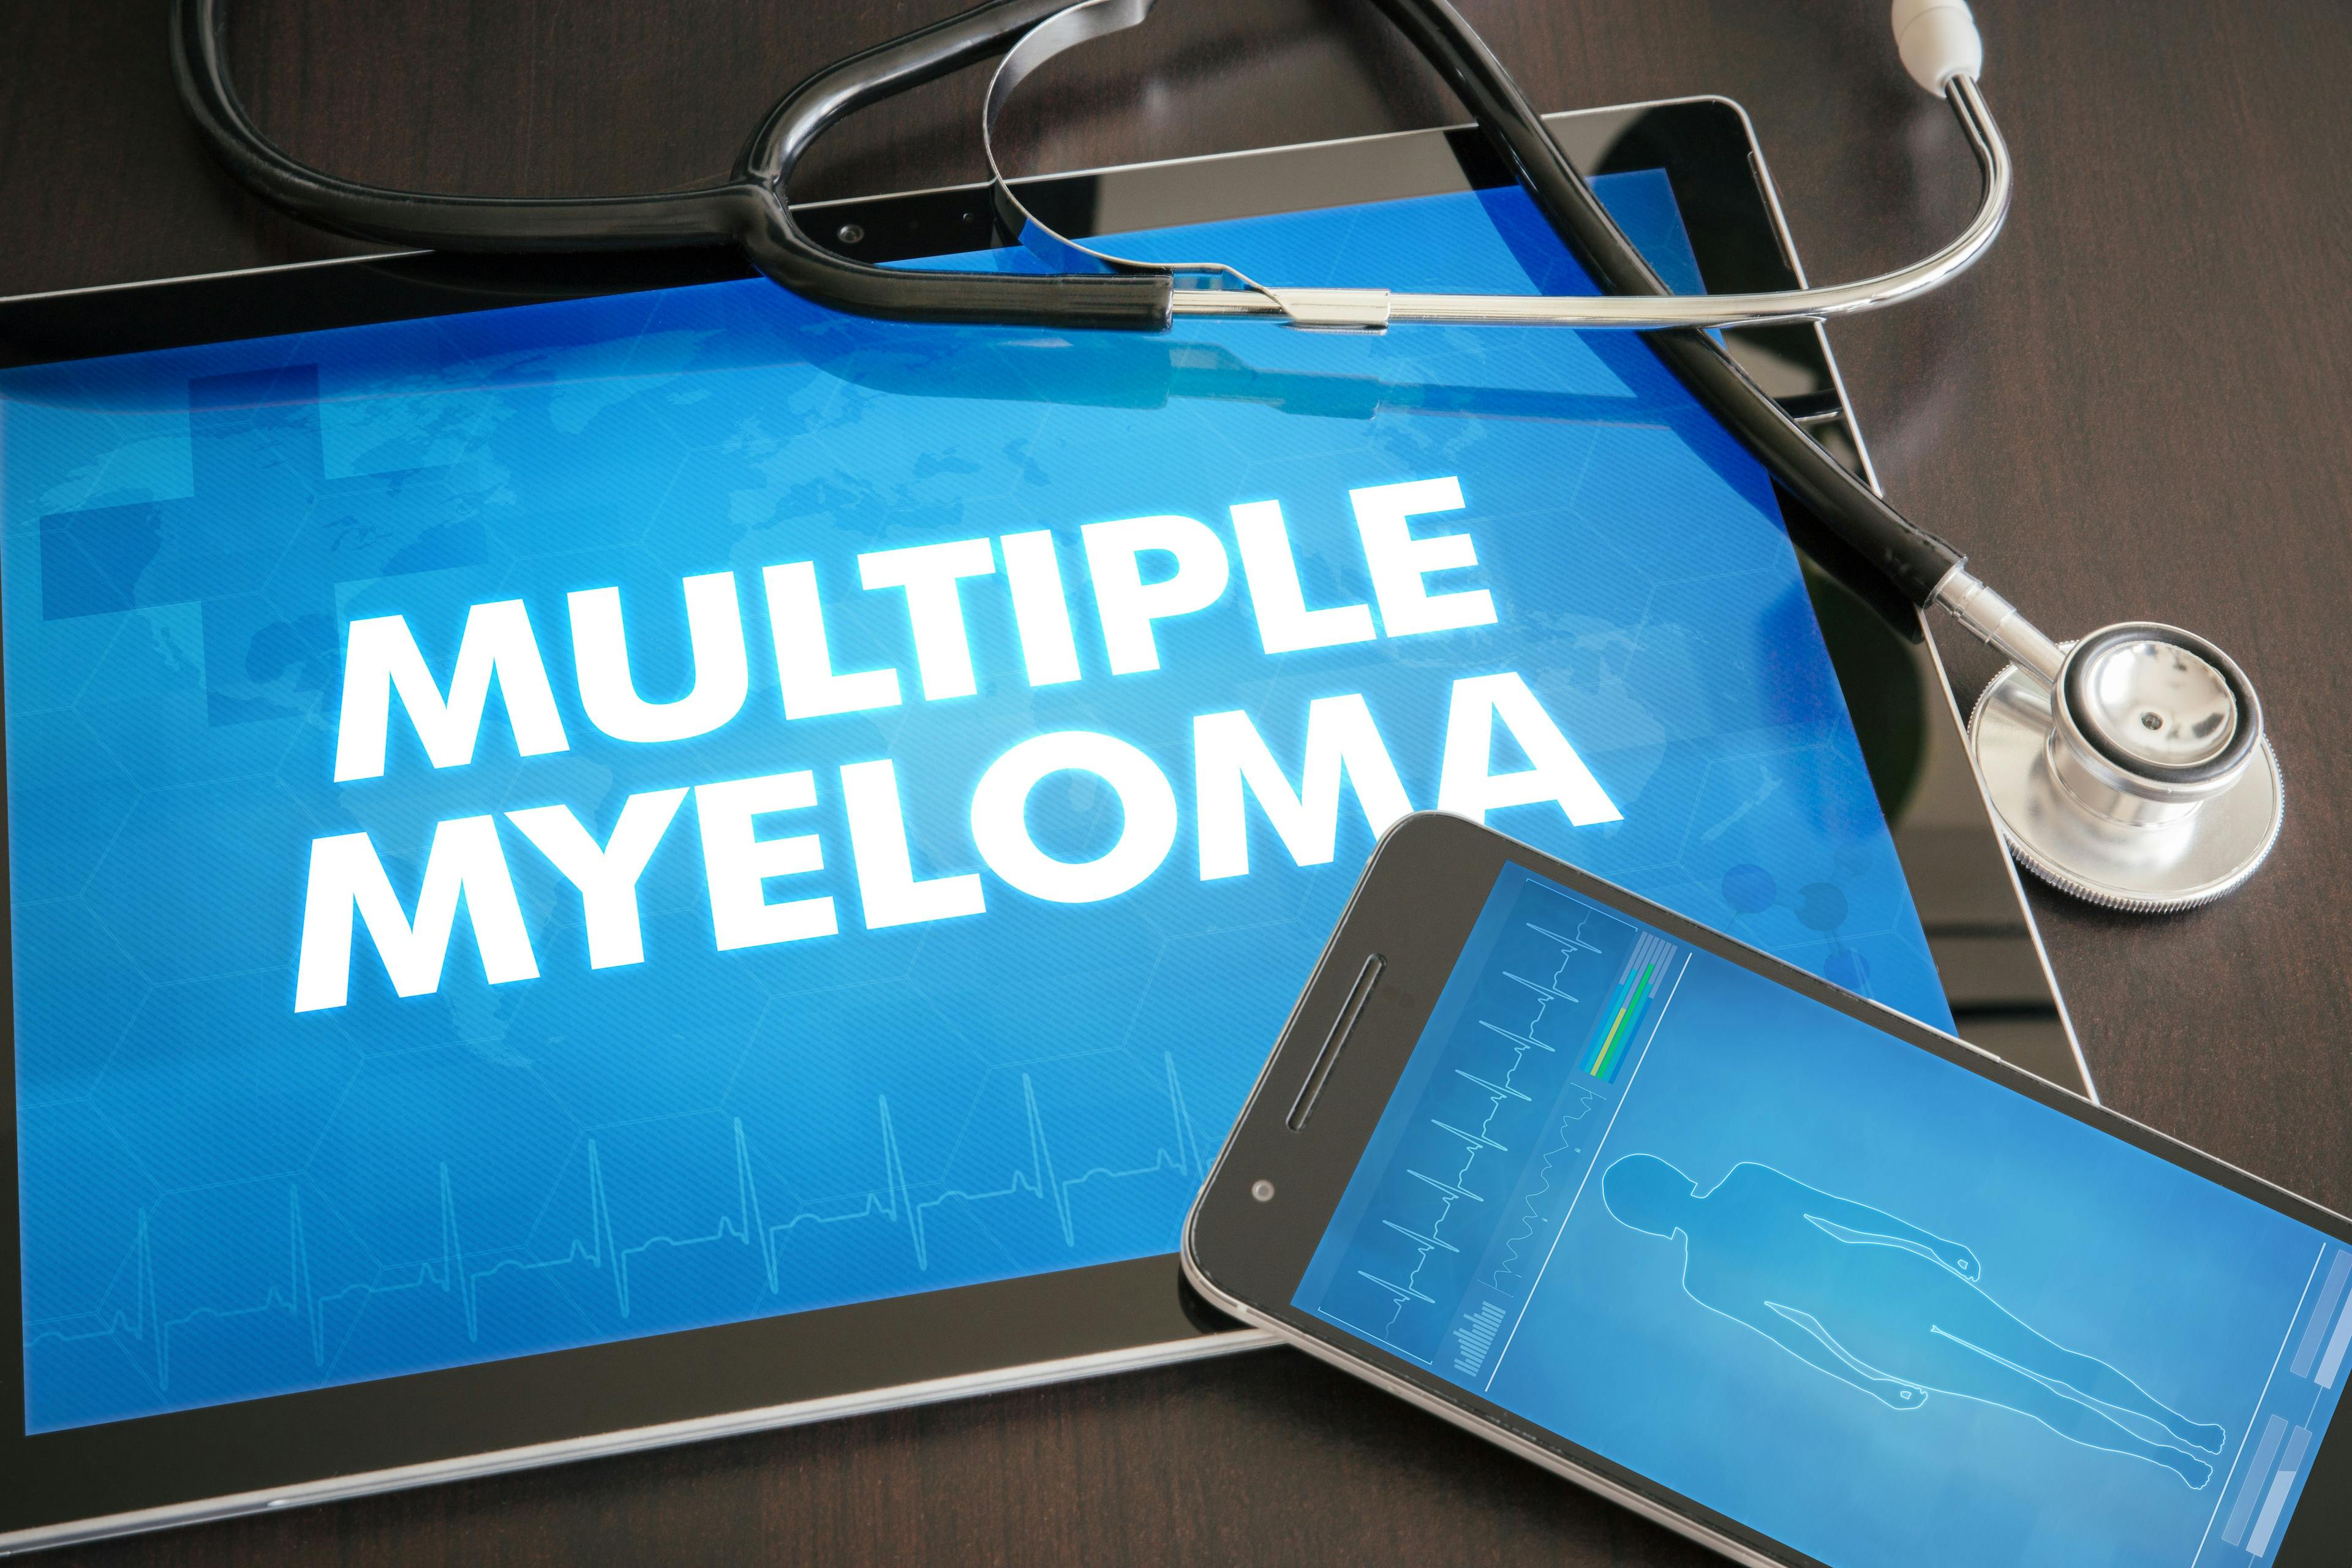 Peter Voorhees, MD on the Progress Made in 2020 For Patients With Multiple Myeloma